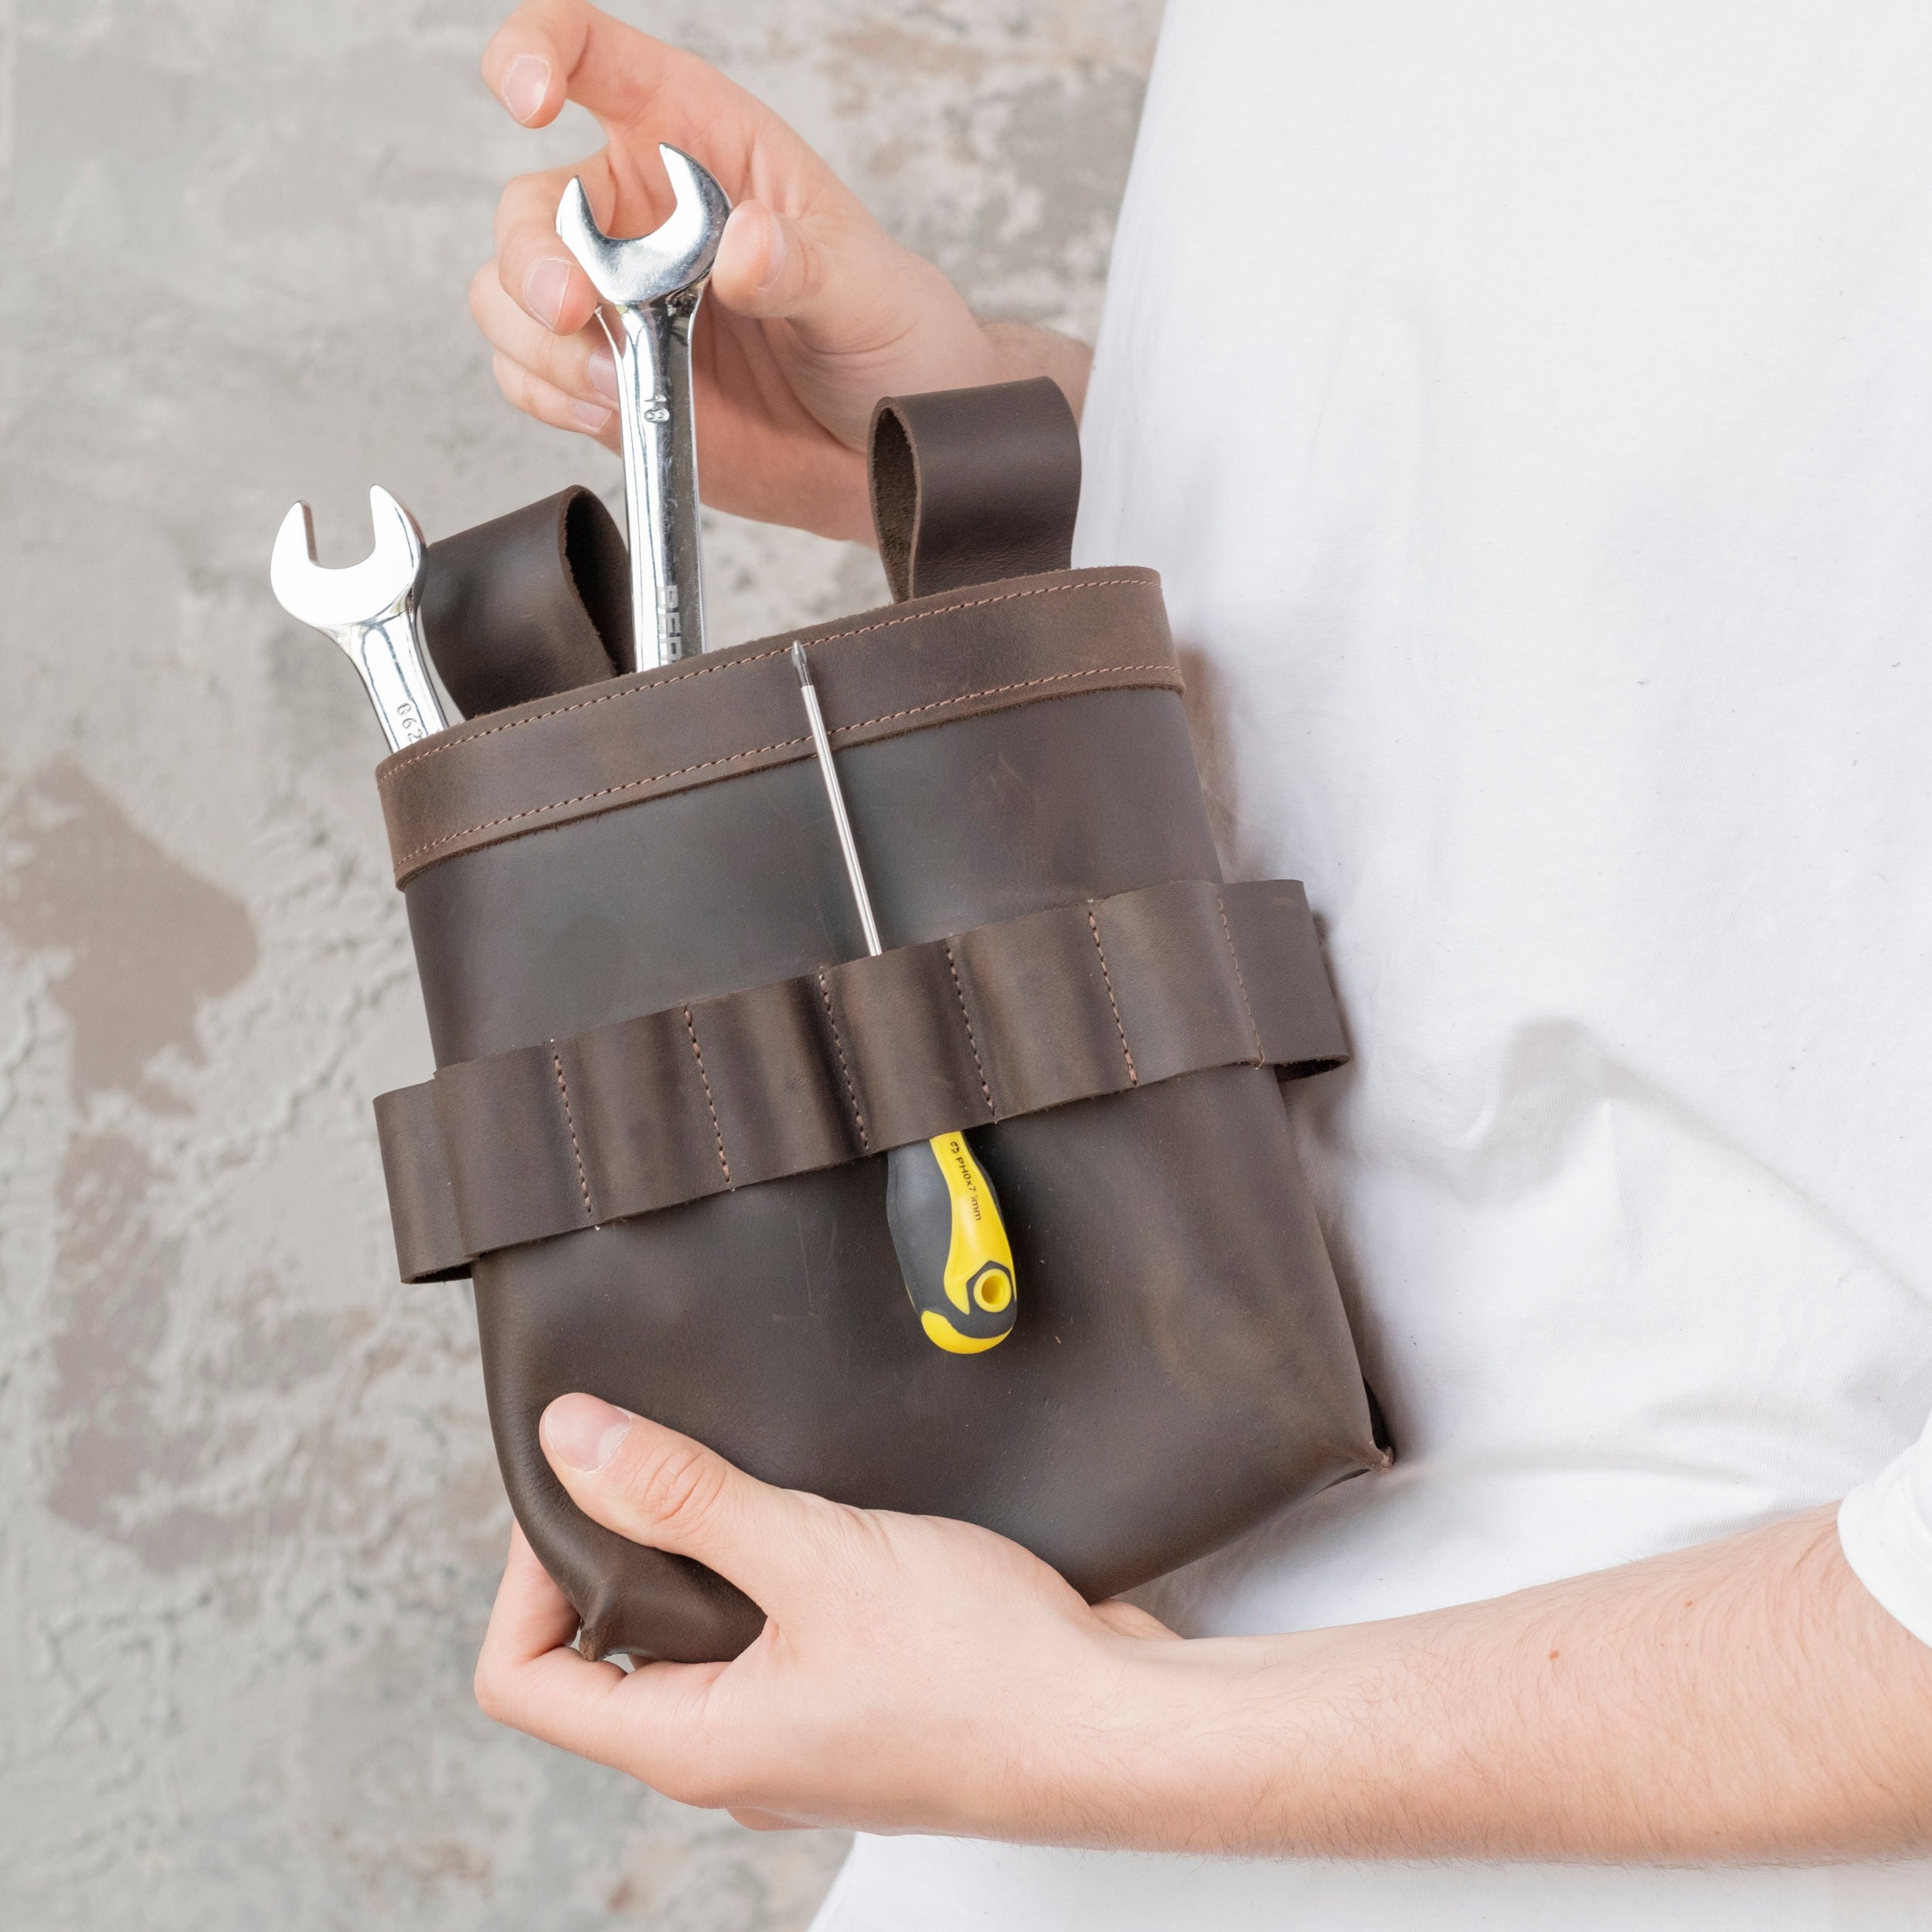 Carpenter Tool Work Belt with Pouches, Canvas, Nail Bags, for Roofers,  Joiners, Utility Strap